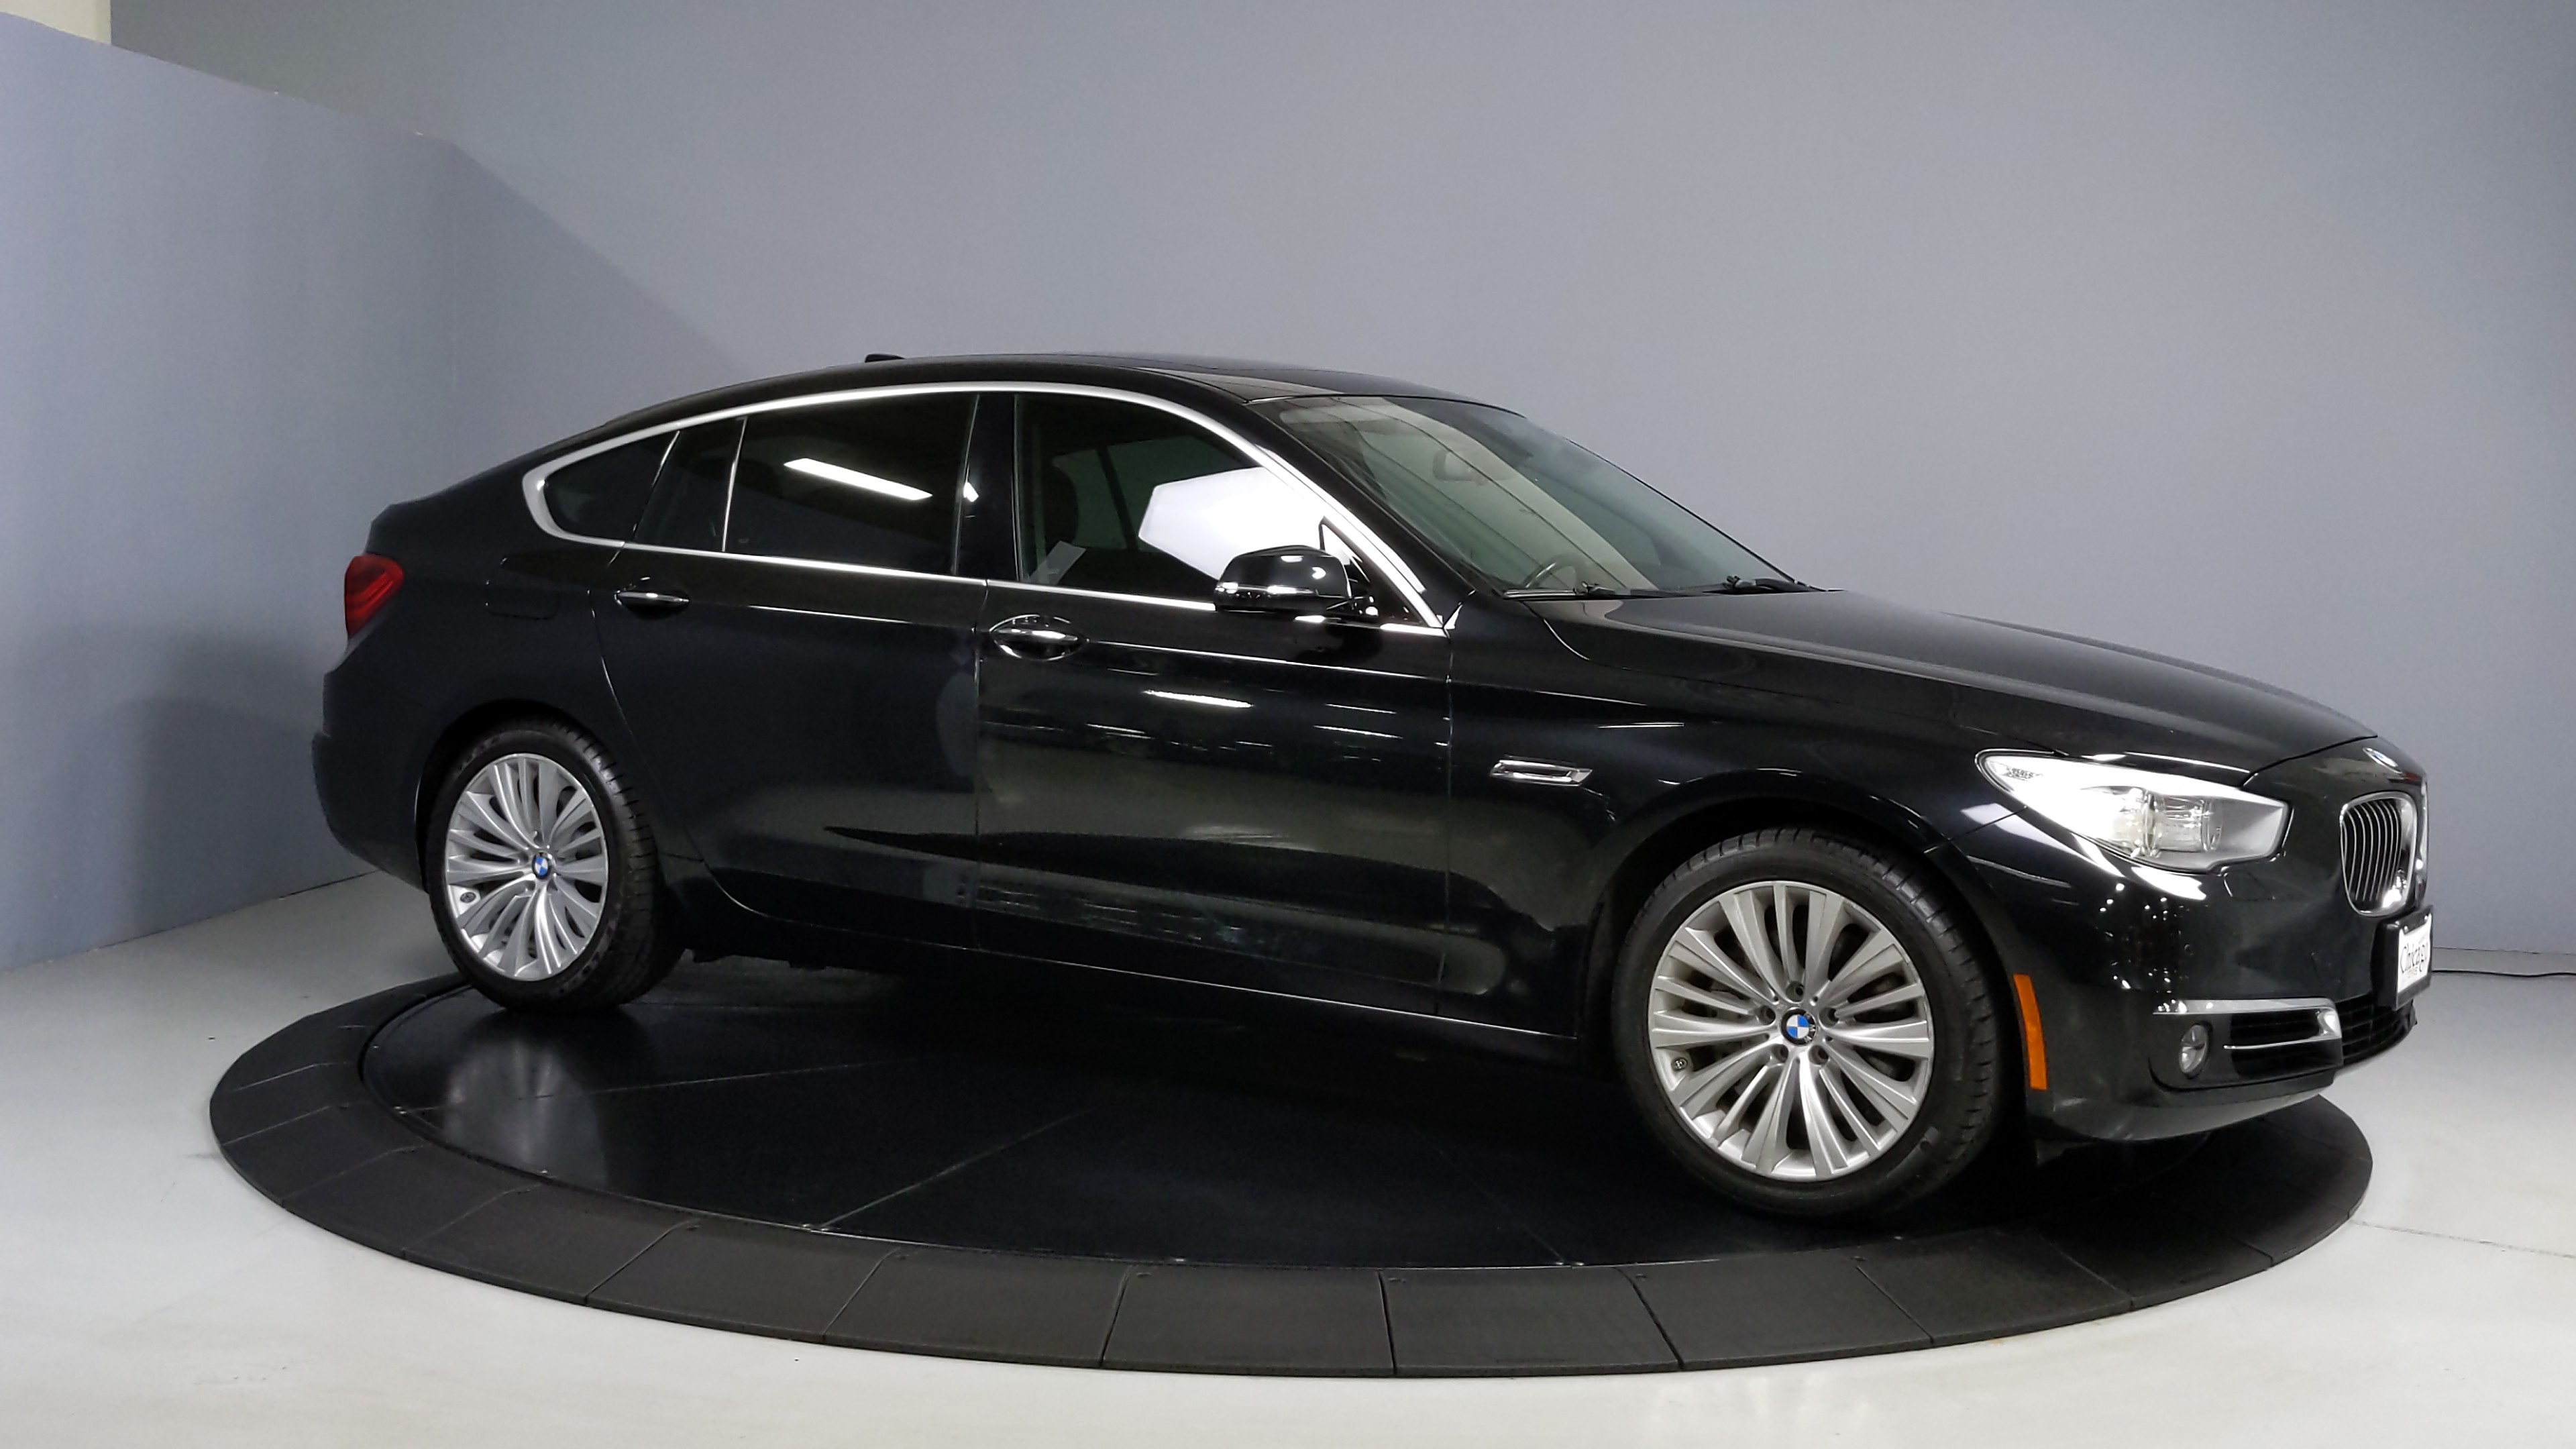 Vehicle details - 2014 BMW 5 Series Gran Turismo at Greater Chicago Motors  Glendale Heights - WWW.Greater Chicago Motors